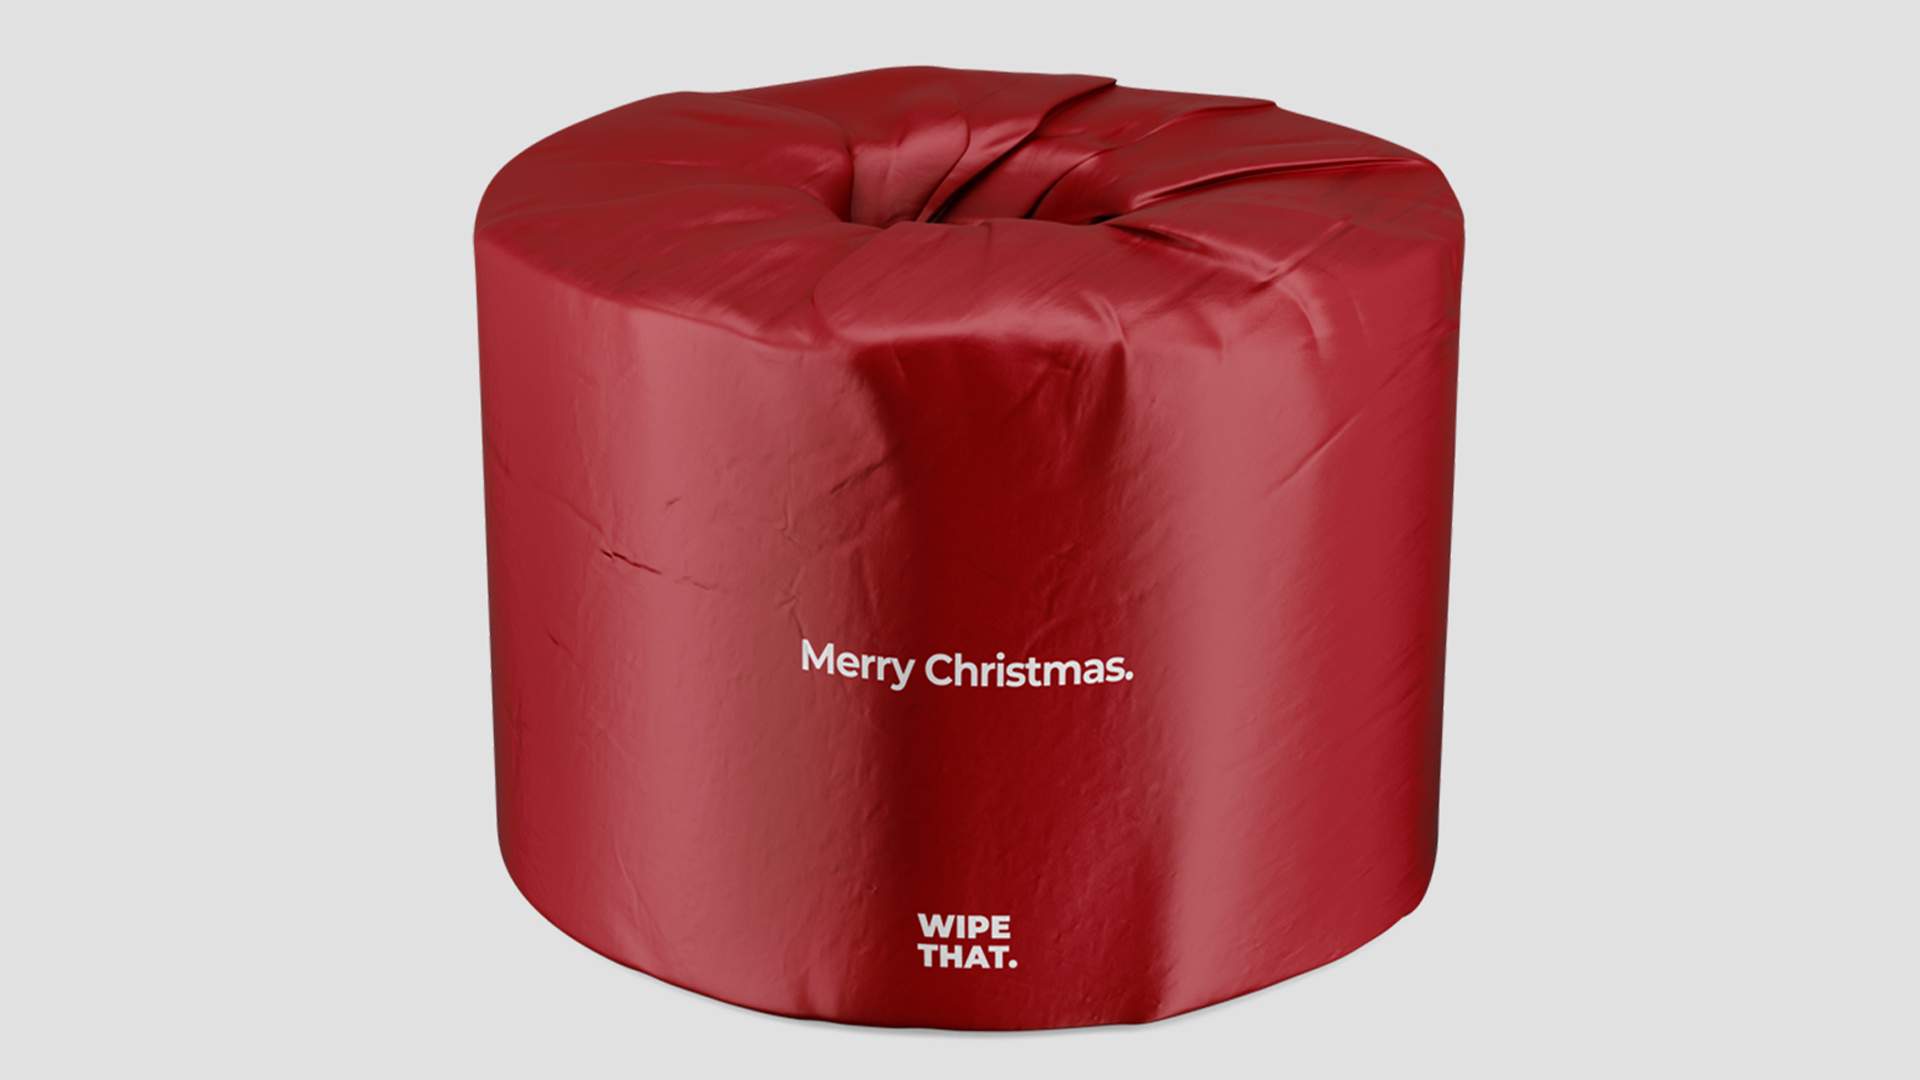 Wipe That Has Launched a Gucci-Inspired, Eco-Friendly Toilet Paper for the Holiday Season